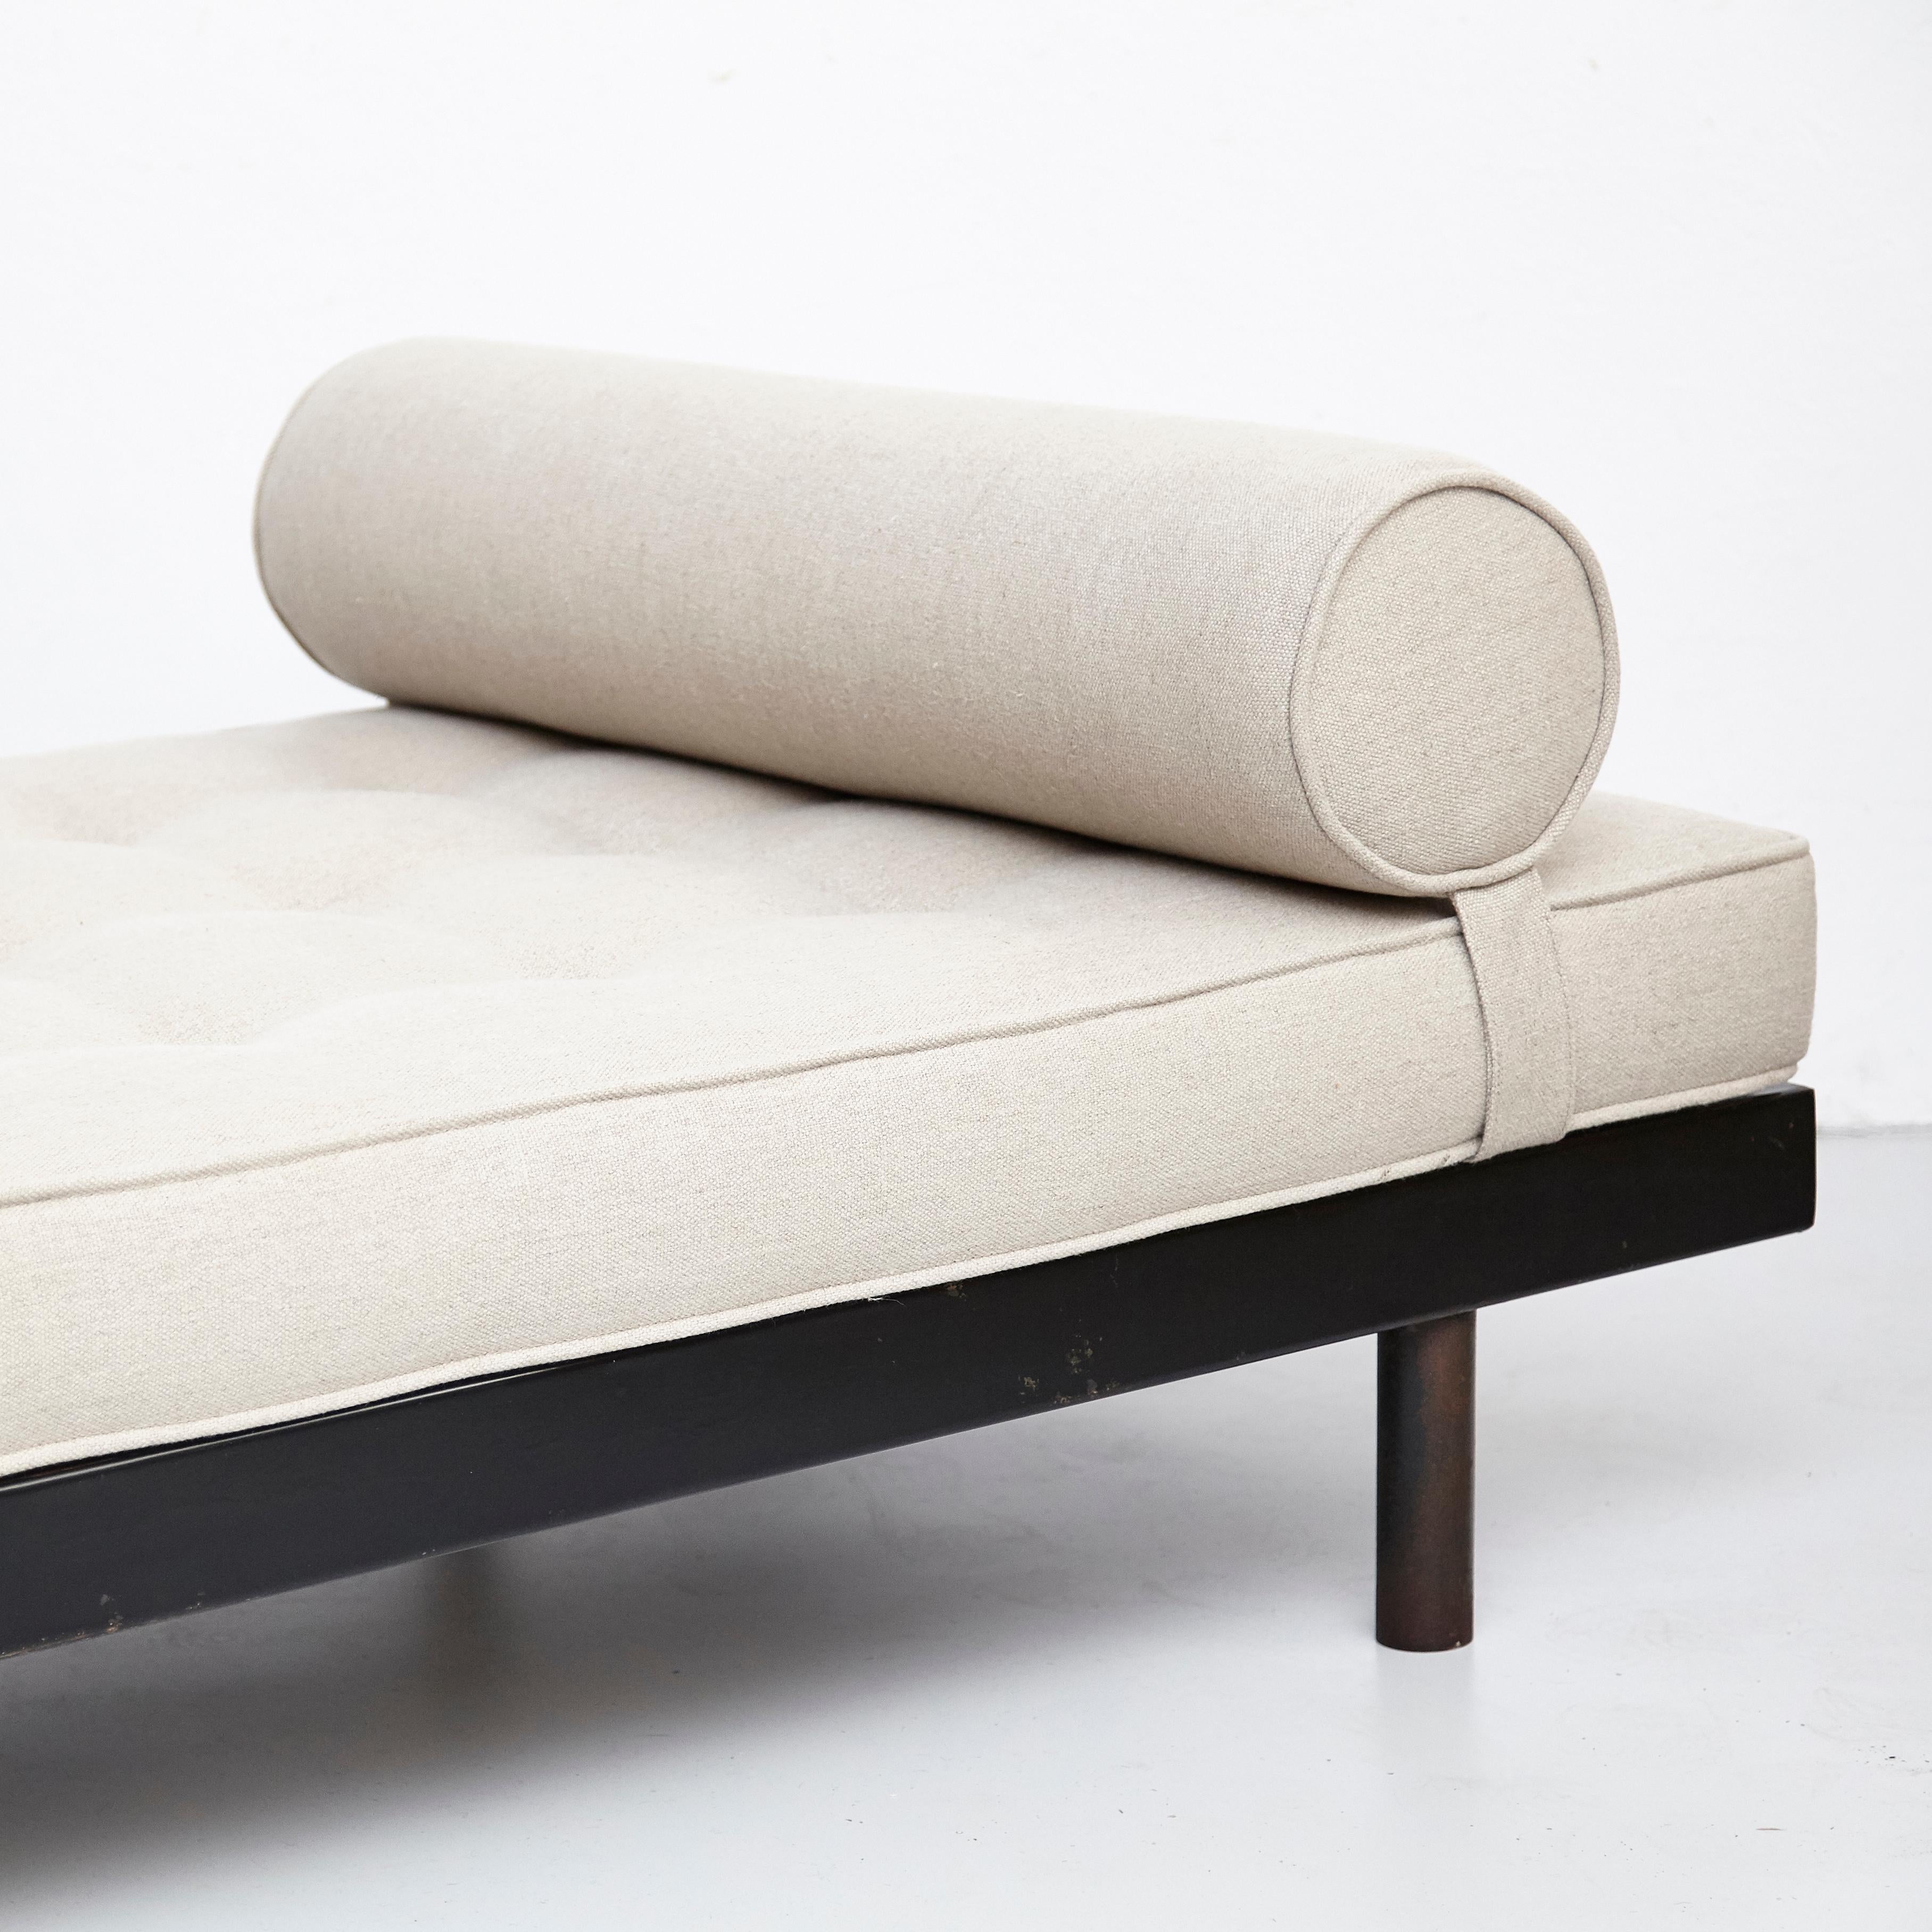 Mid-20th Century Jean Prouvé Mid-Century Modern S.C.A.L. Daybed, circa 1950